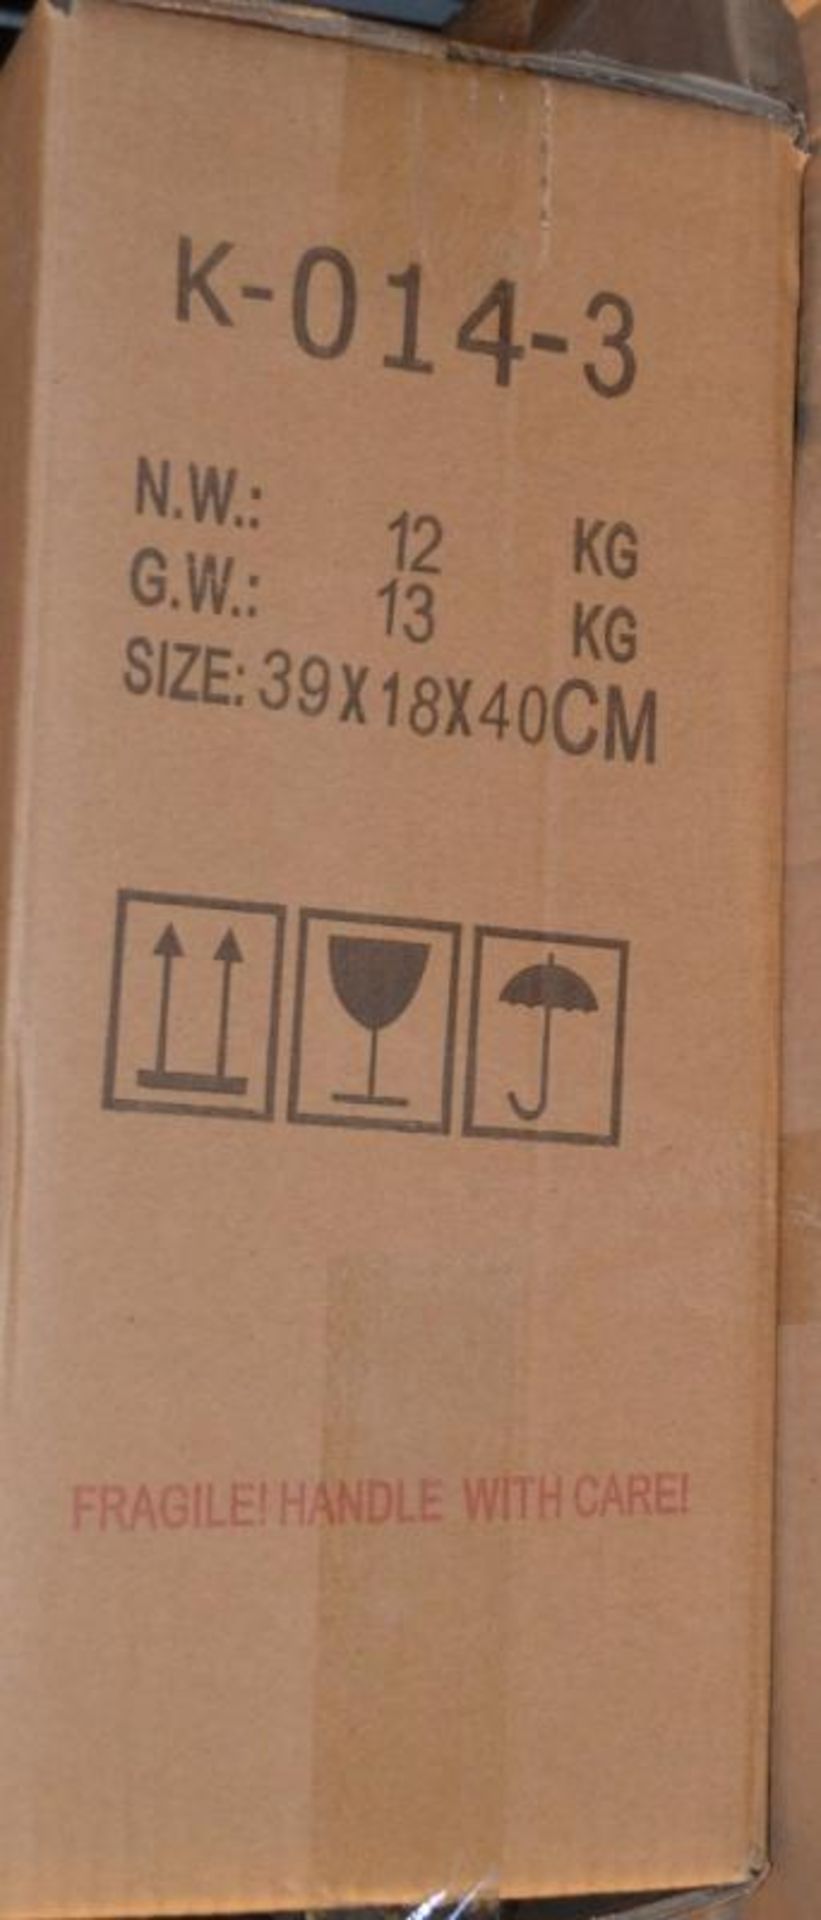 1 x Close Coupled Toilet Pan With Soft Close Toilet Seat And Cistern (Inc. Fittings) - Brand New Box - Image 7 of 10